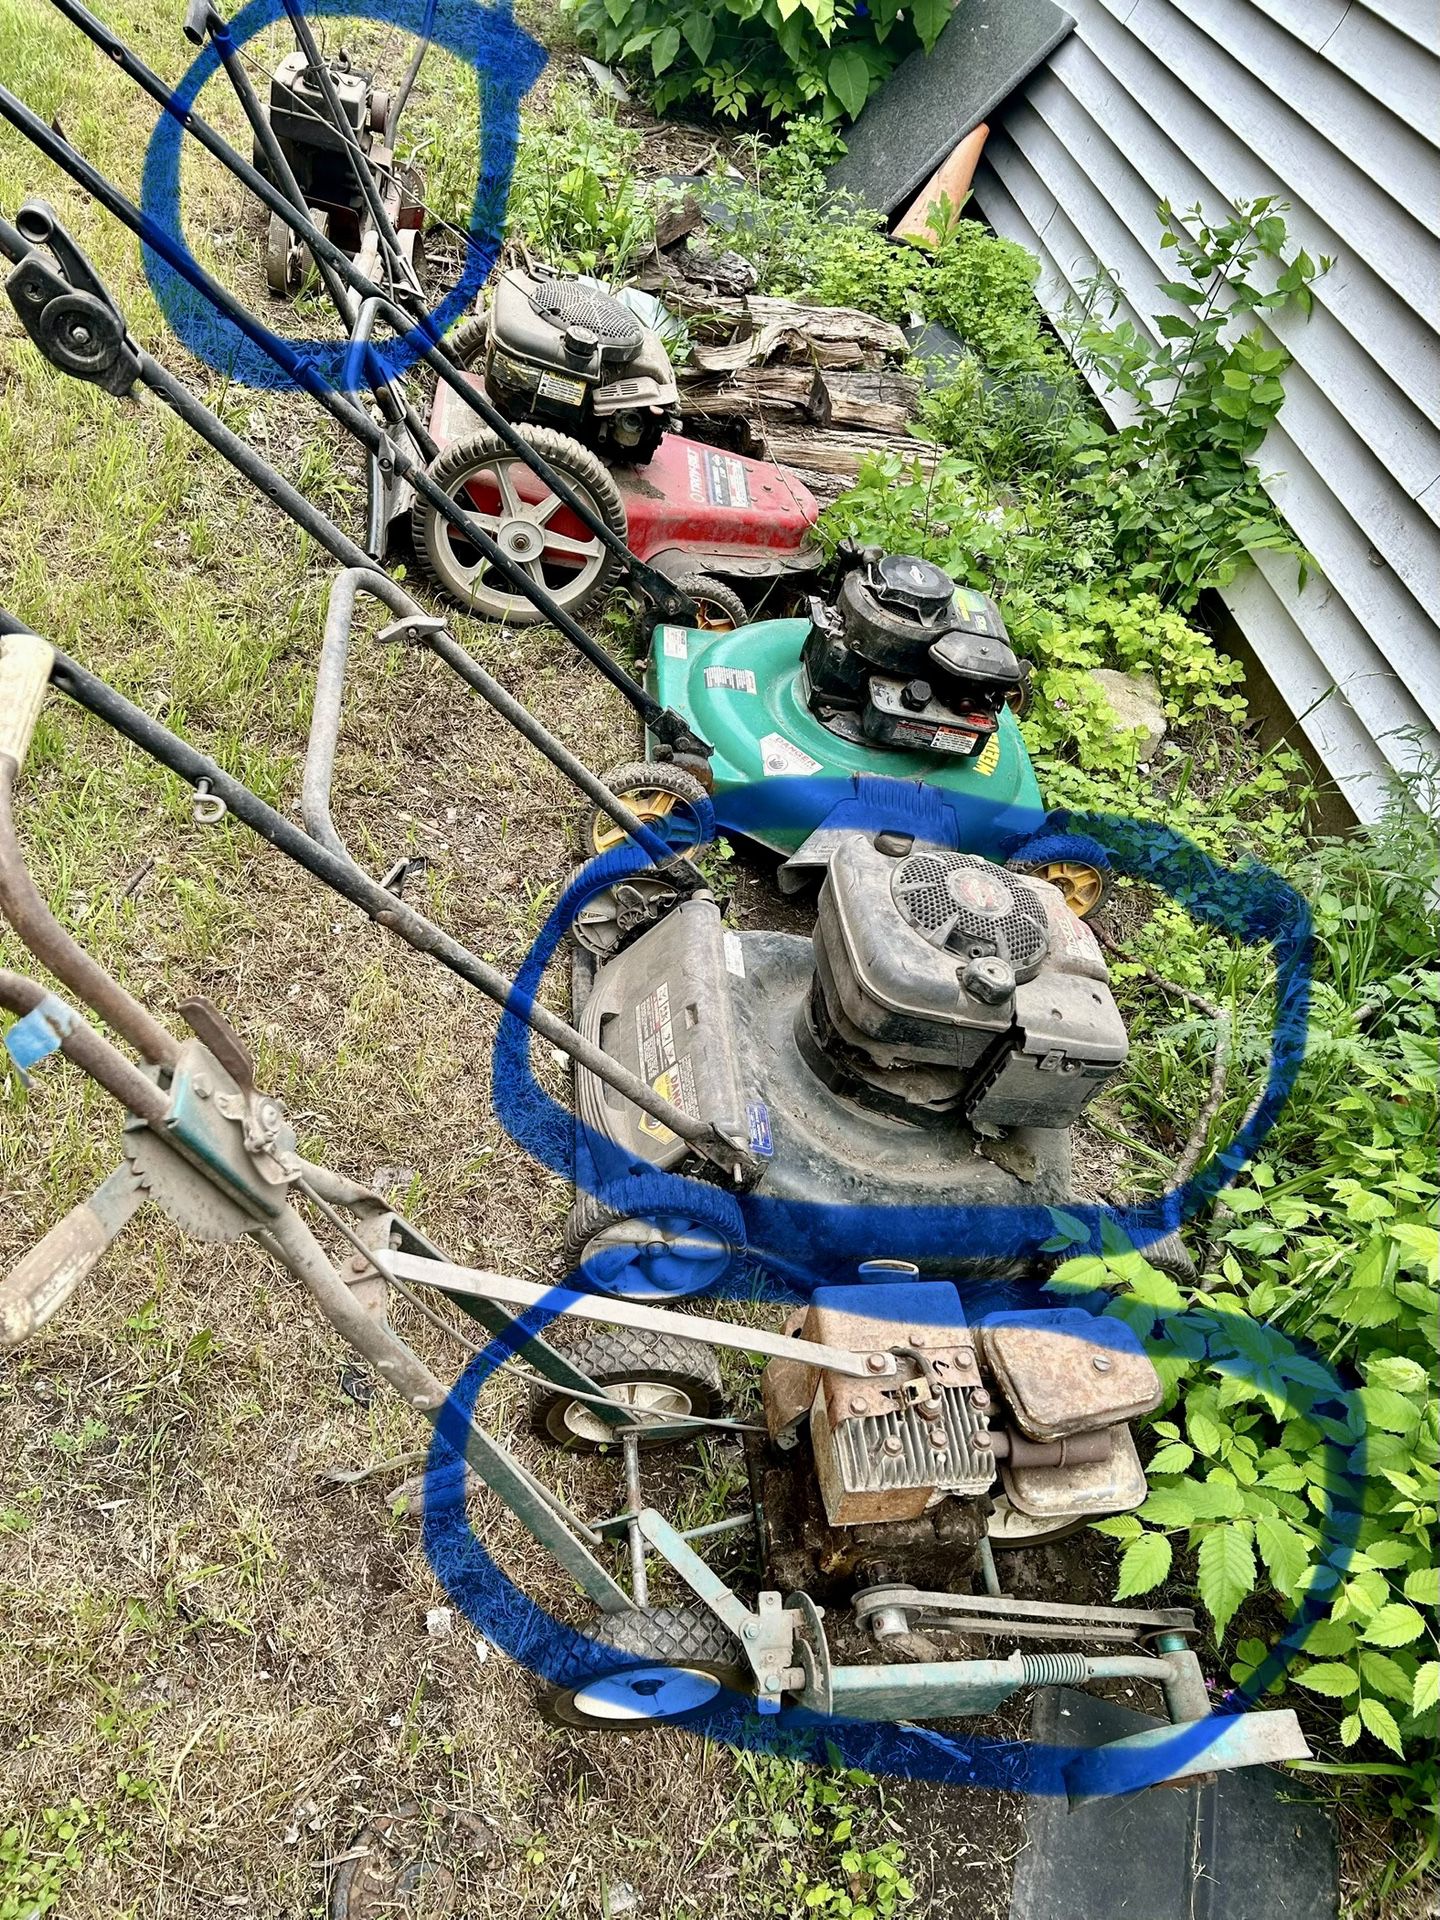 2 Edgers and 1 Huskee Mower